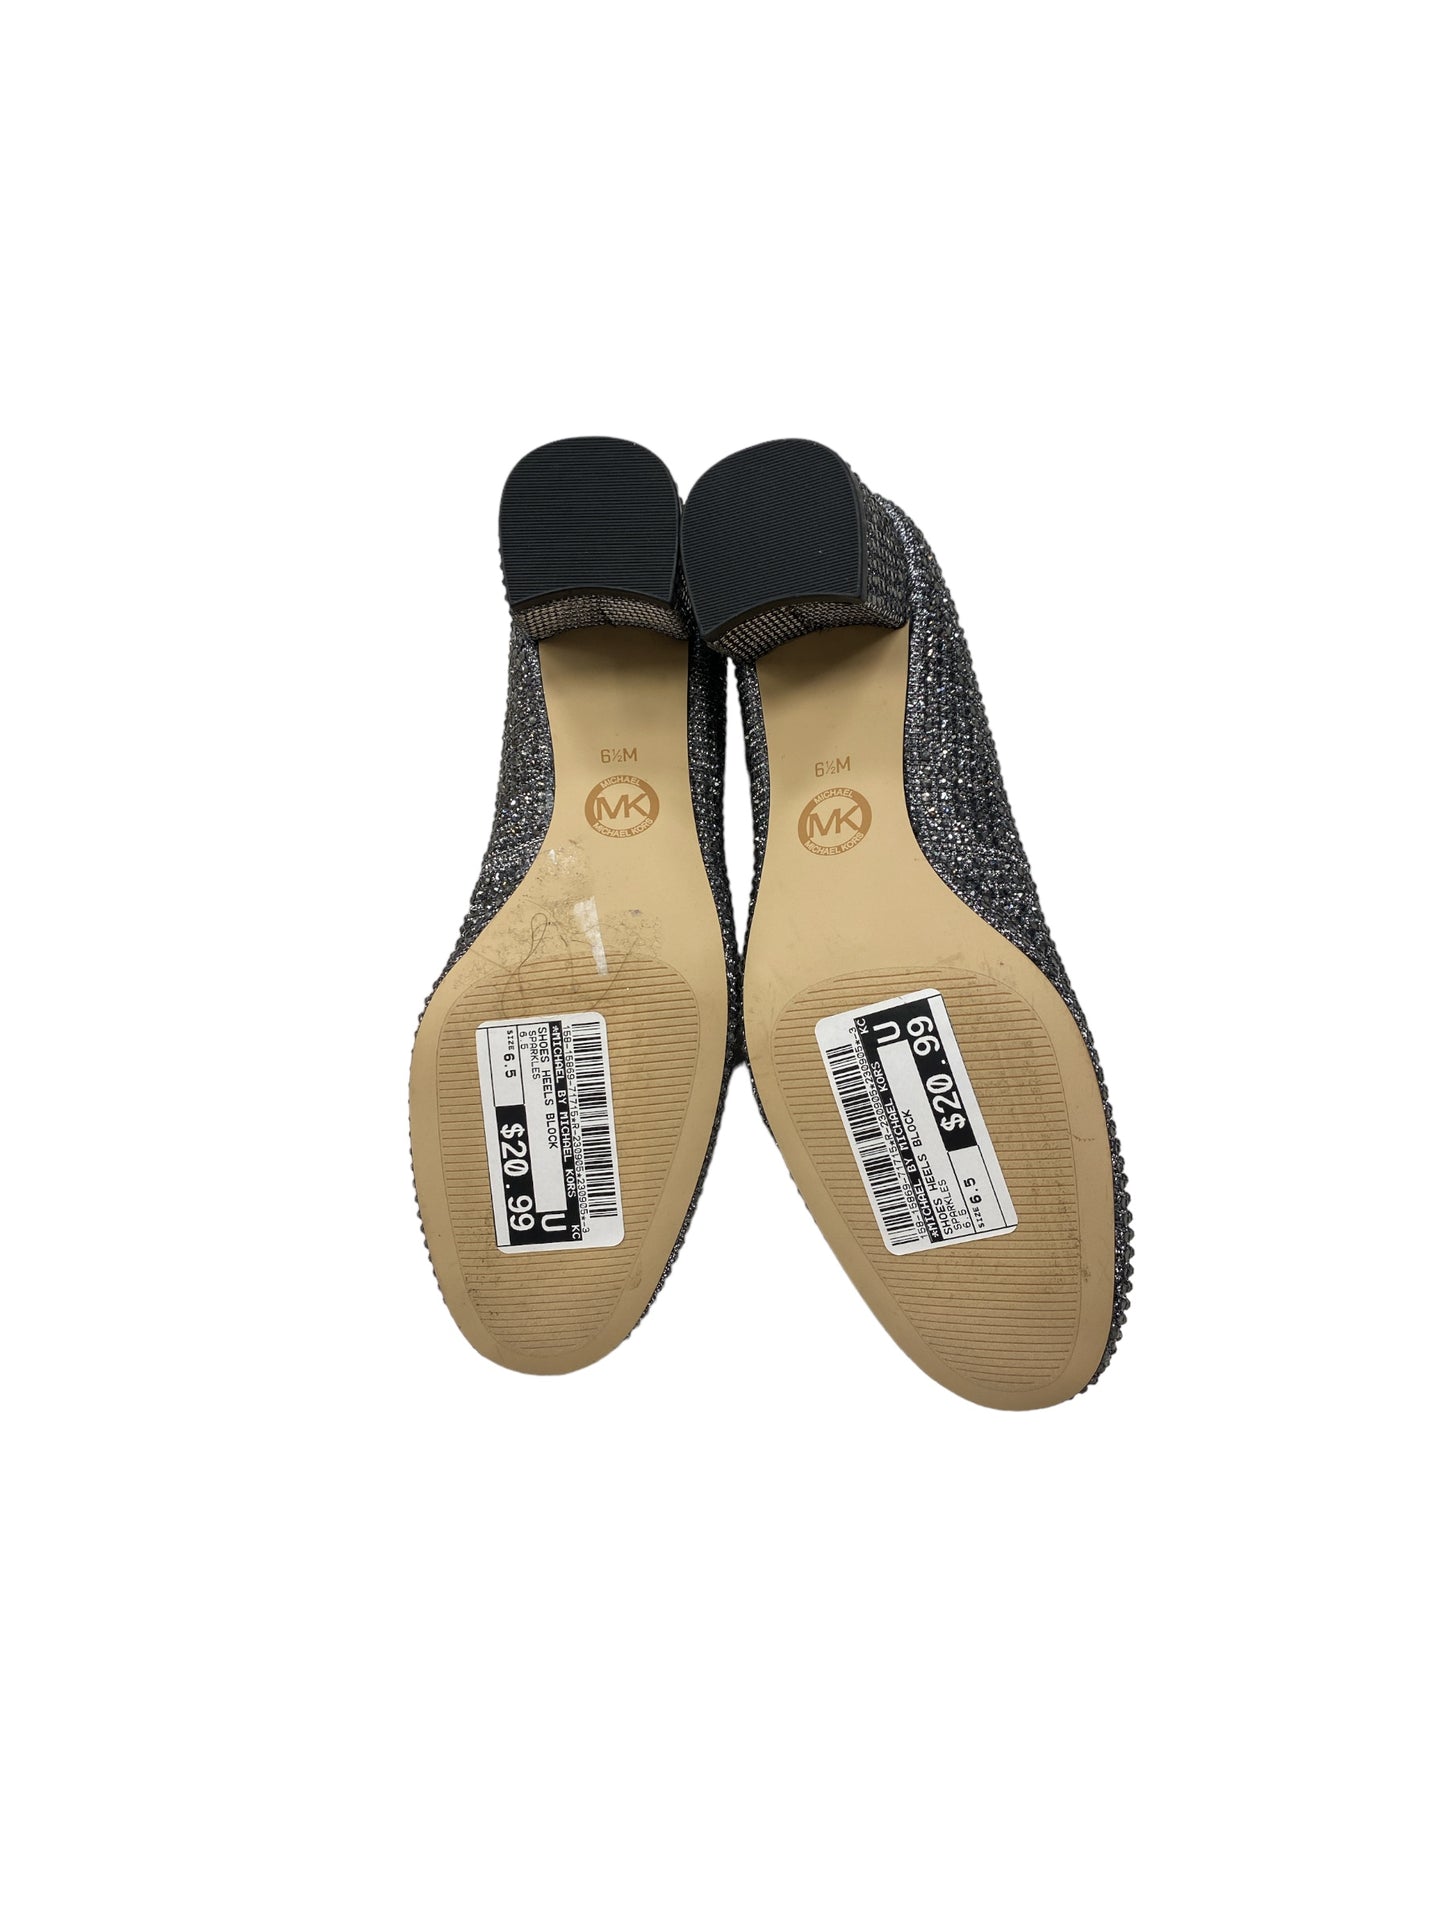 Shoes Heels Block By Michael By Michael Kors  Size: 6.5